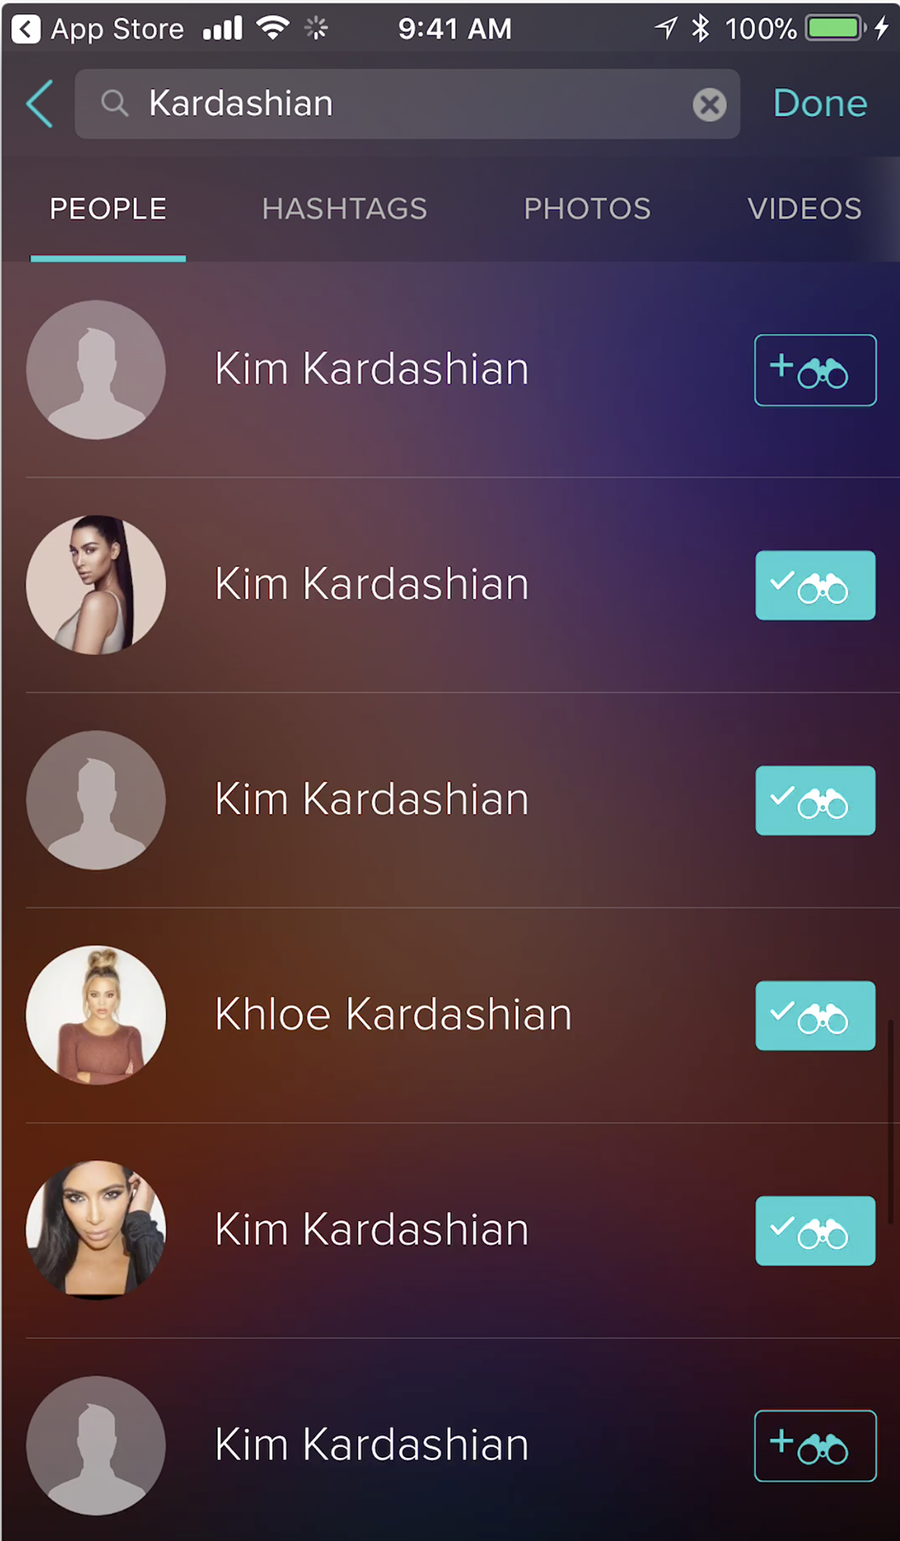 Just how many Kardashians does a social network need?